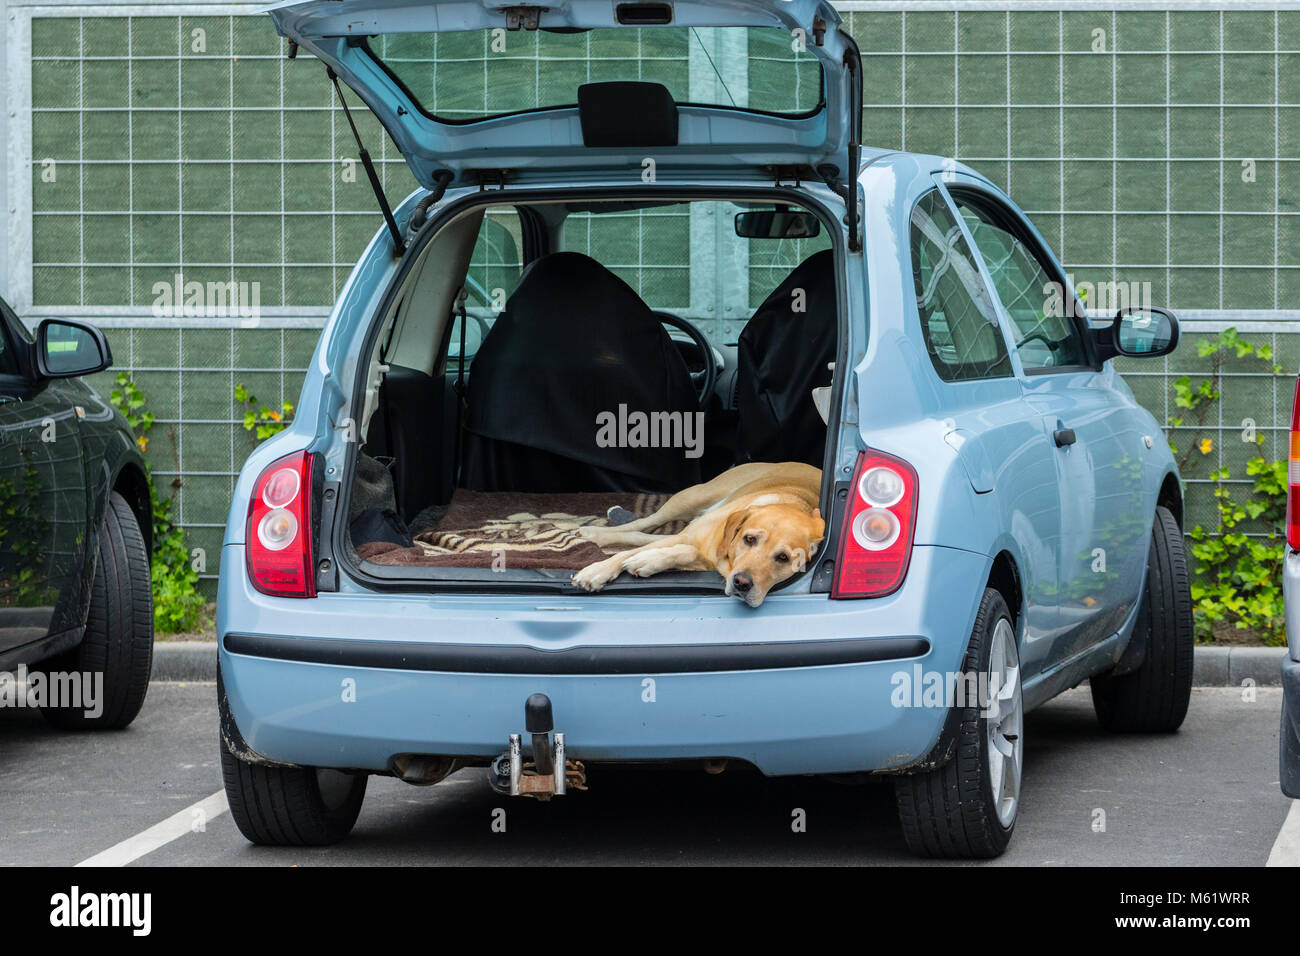 Dog waits in a hot parked car on its owner, The owner has left the car with an open back door in the parking lot while he is shopping. Stock Photo